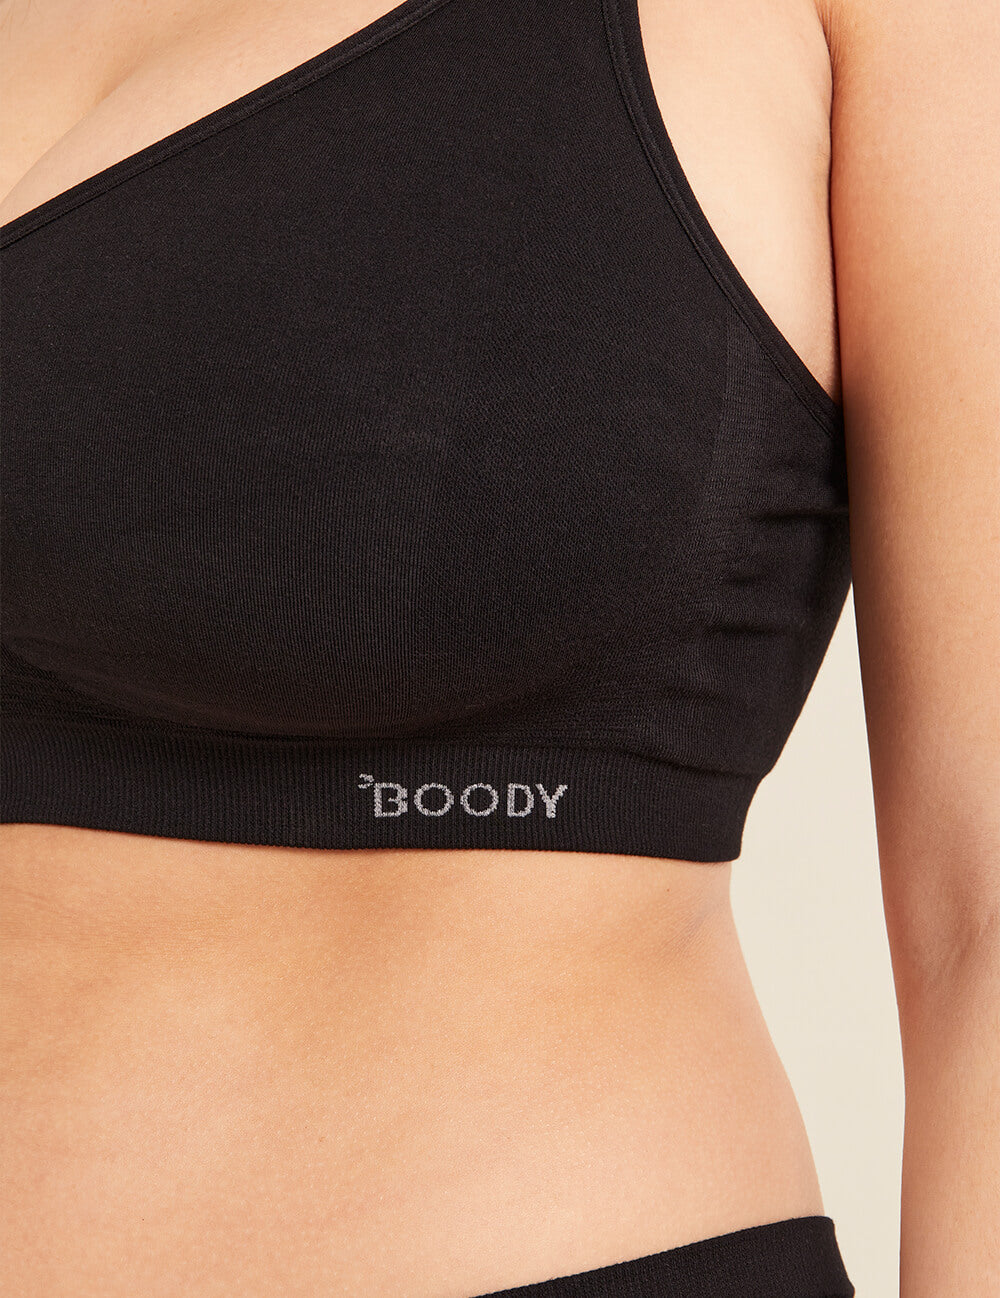 Boody Full Bust Wireless Bra with matching underwear in Black Front View Close